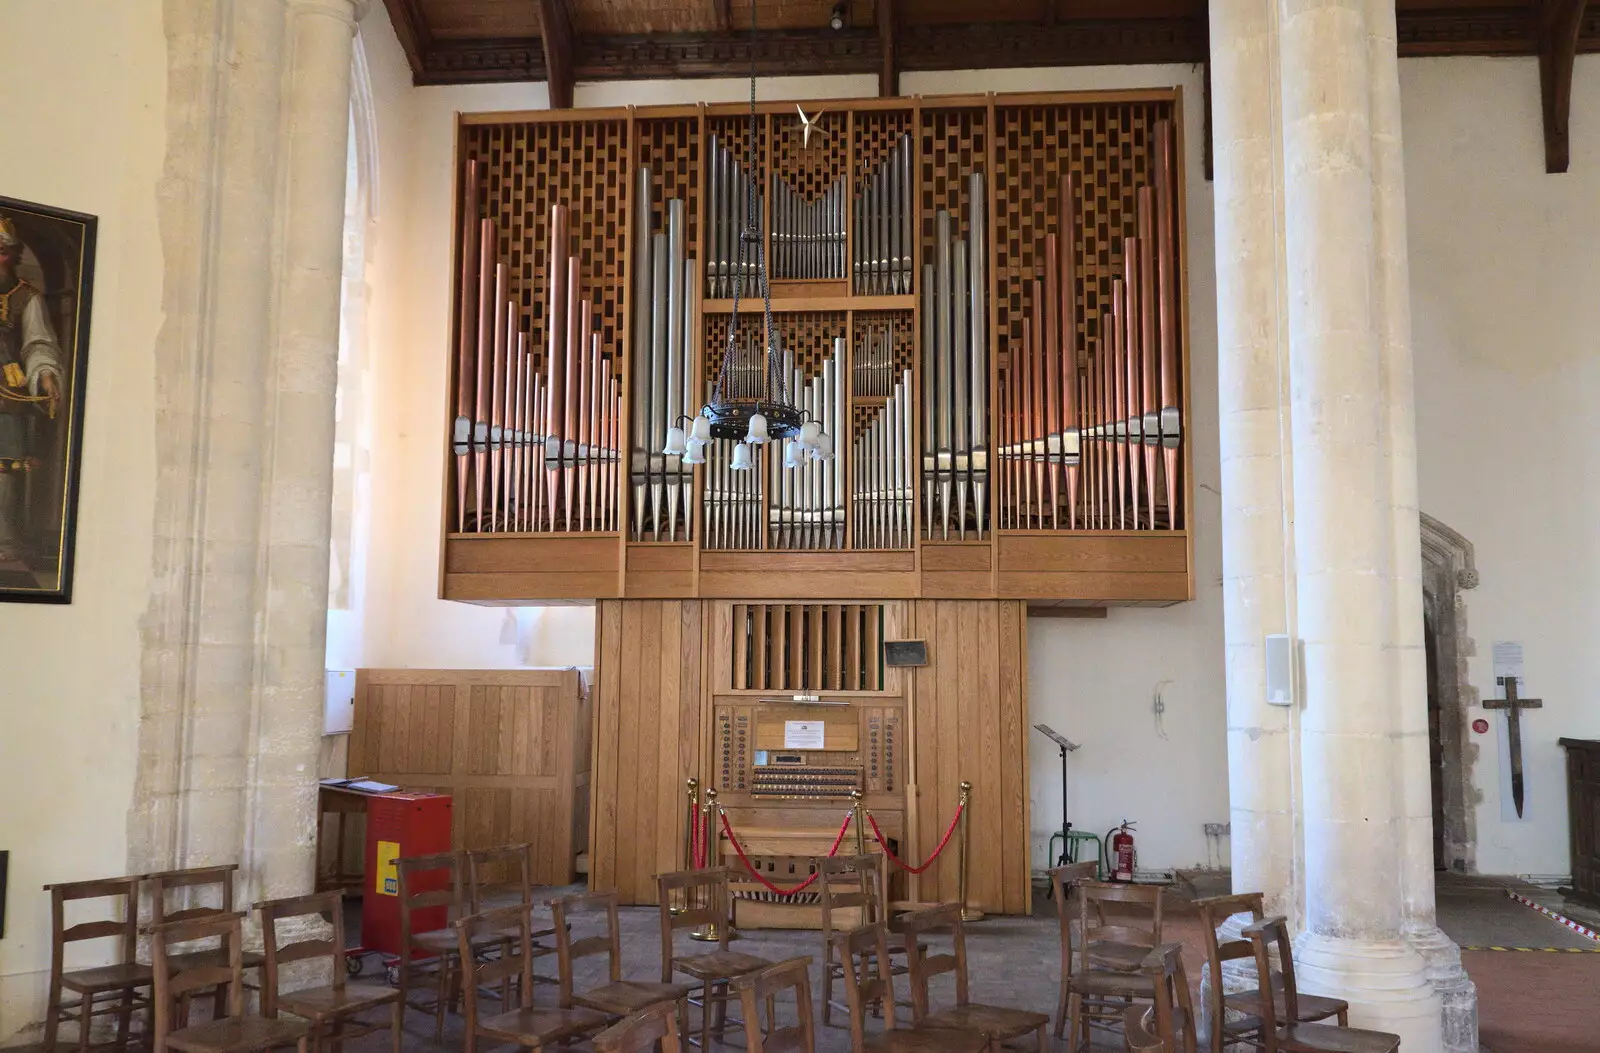 The impressive Peter Collins organ, from A Trip to Orford Castle, Orford, Suffolk - 26th February 2022